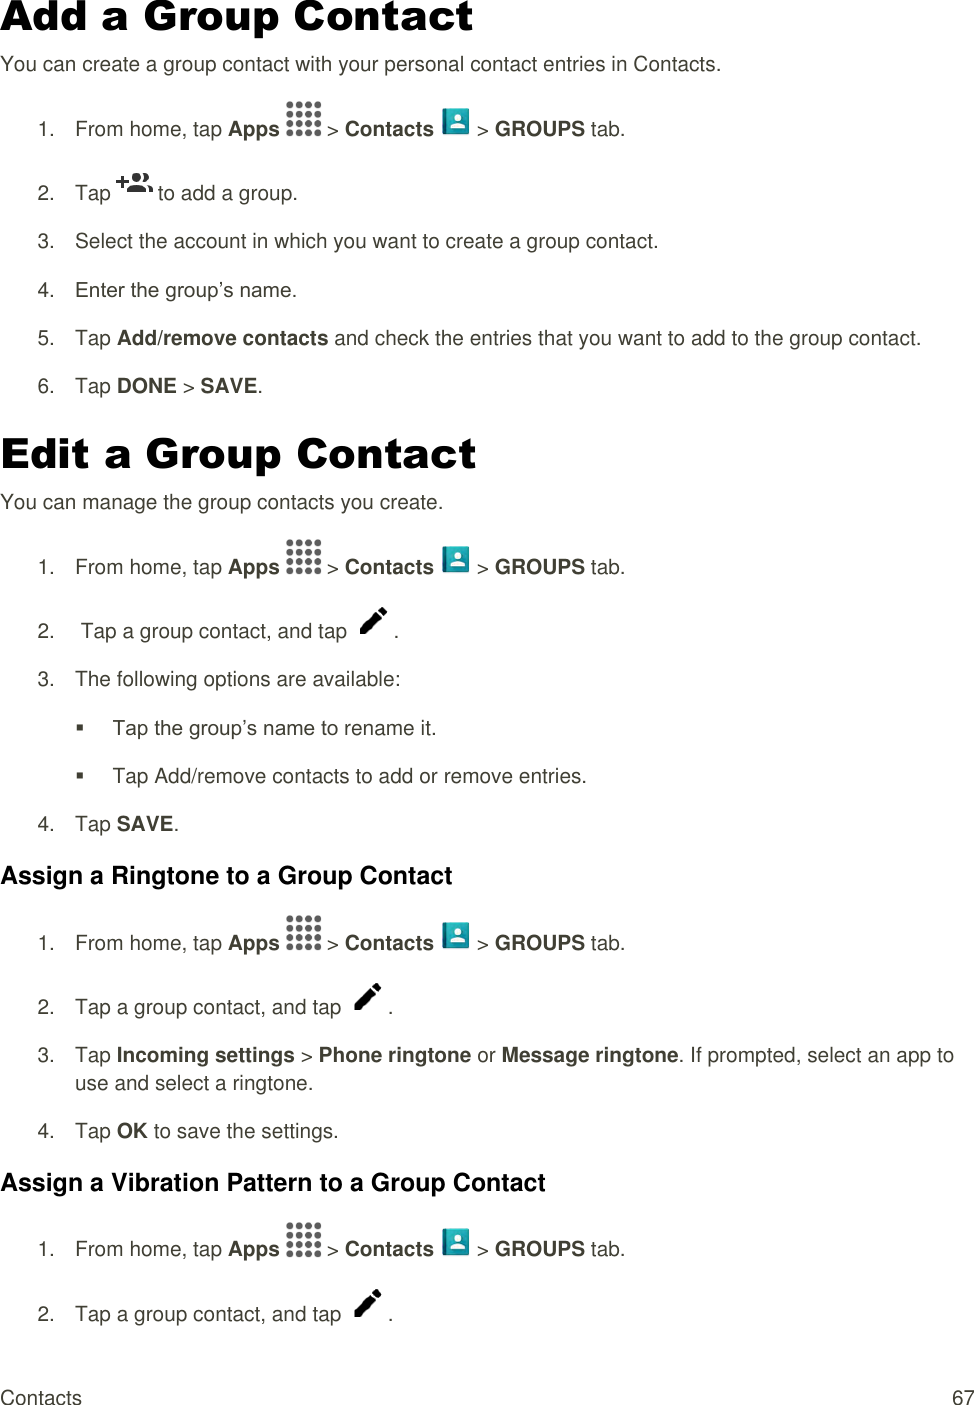 Contacts  67 Add a Group Contact  You can create a group contact with your personal contact entries in Contacts. 1.  From home, tap Apps   &gt; Contacts   &gt; GROUPS tab.  2.  Tap   to add a group. 3.  Select the account in which you want to create a group contact. 4. Enter the group’s name. 5.  Tap Add/remove contacts and check the entries that you want to add to the group contact. 6.  Tap DONE &gt; SAVE. Edit a Group Contact  You can manage the group contacts you create. 1.  From home, tap Apps   &gt; Contacts   &gt; GROUPS tab. 2.   Tap a group contact, and tap  . 3.  The following options are available:  Tap the group’s name to rename it.   Tap Add/remove contacts to add or remove entries. 4.  Tap SAVE. Assign a Ringtone to a Group Contact 1.  From home, tap Apps   &gt; Contacts   &gt; GROUPS tab. 2.  Tap a group contact, and tap  . 3.  Tap Incoming settings &gt; Phone ringtone or Message ringtone. If prompted, select an app to use and select a ringtone. 4.  Tap OK to save the settings. Assign a Vibration Pattern to a Group Contact 1.  From home, tap Apps   &gt; Contacts   &gt; GROUPS tab. 2.  Tap a group contact, and tap  . 